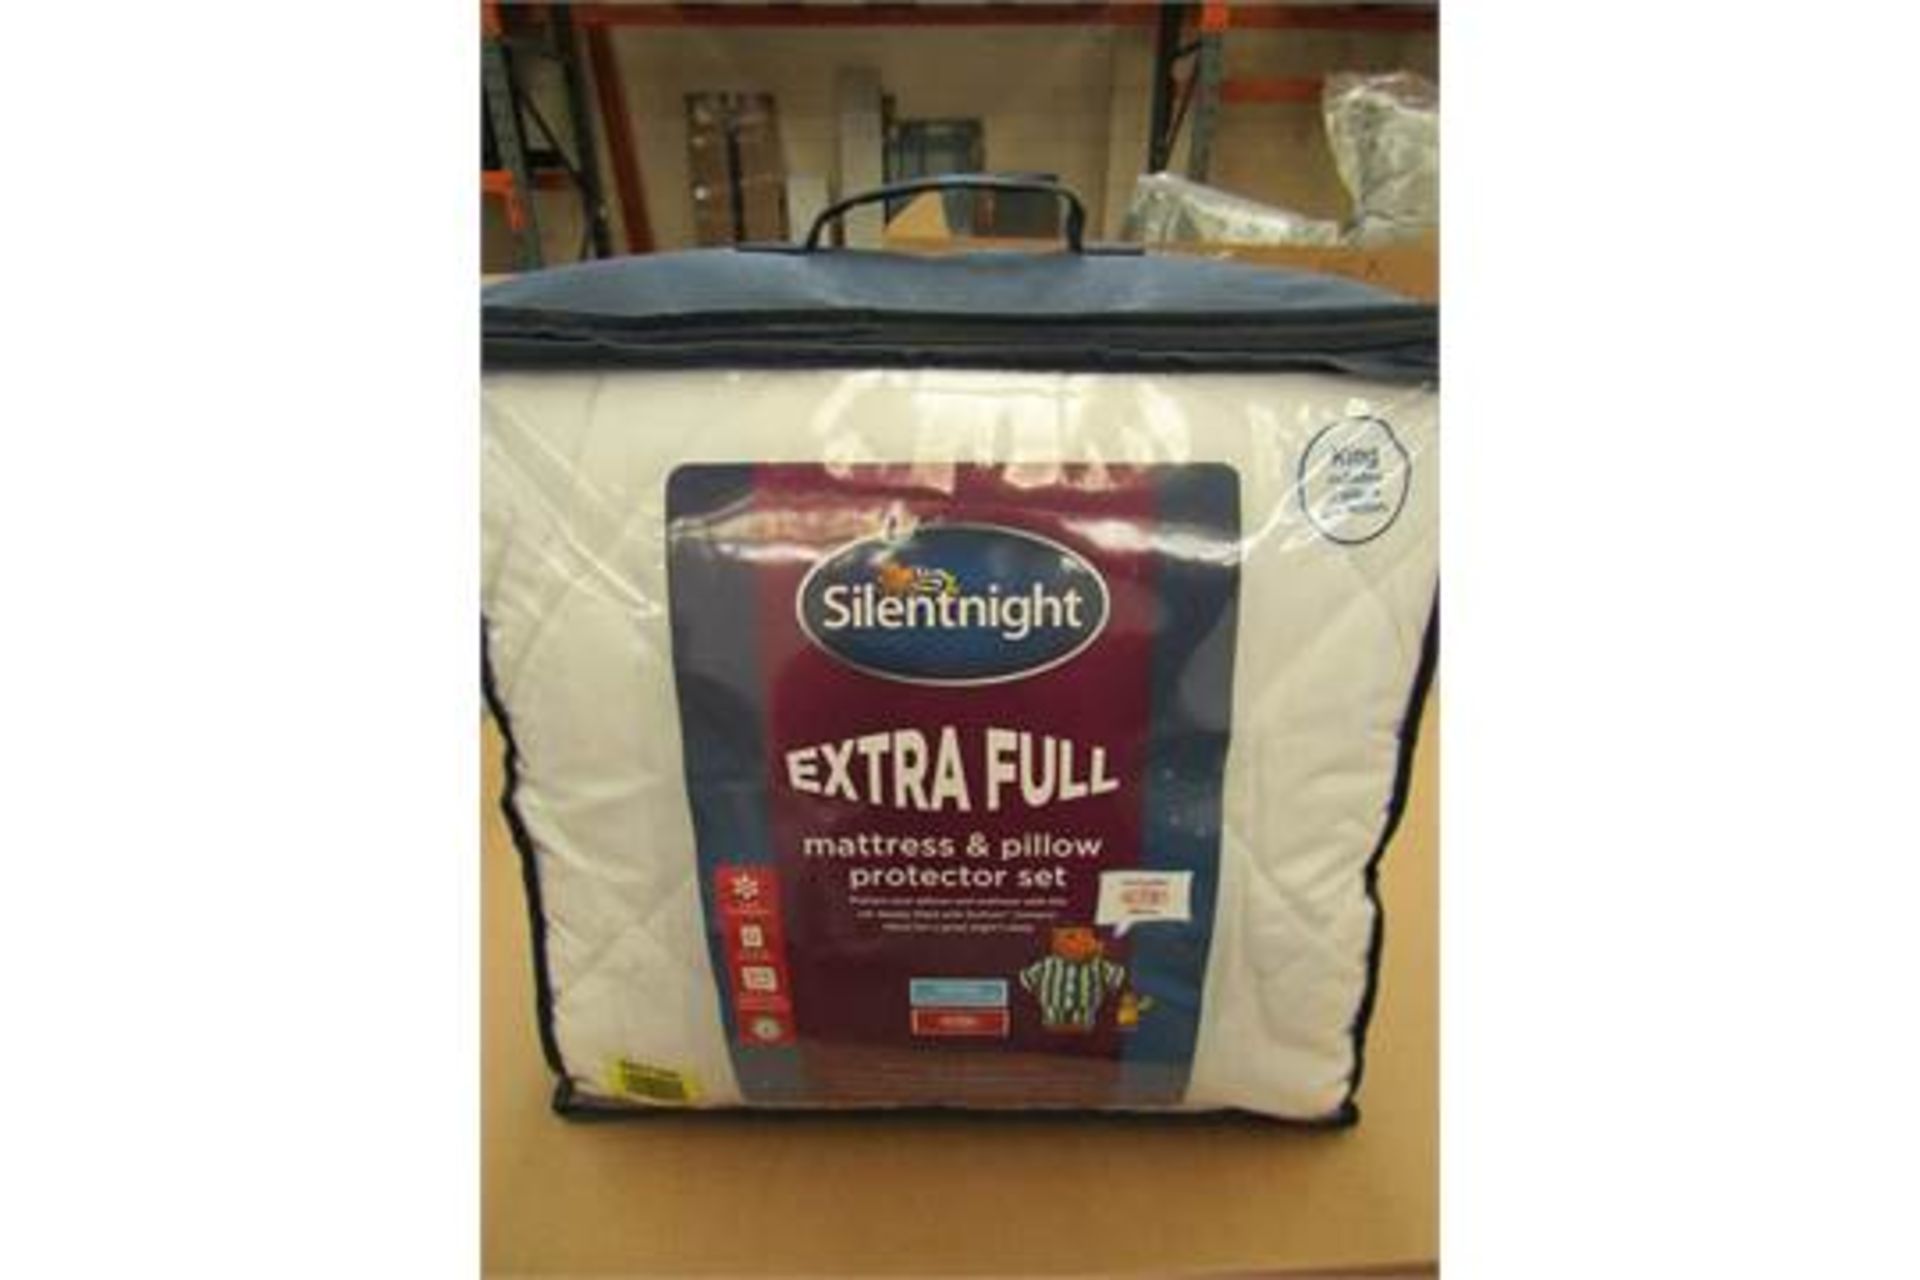 1x Silentnight extra full mattress & pillow protector set, King size, new in packaging.